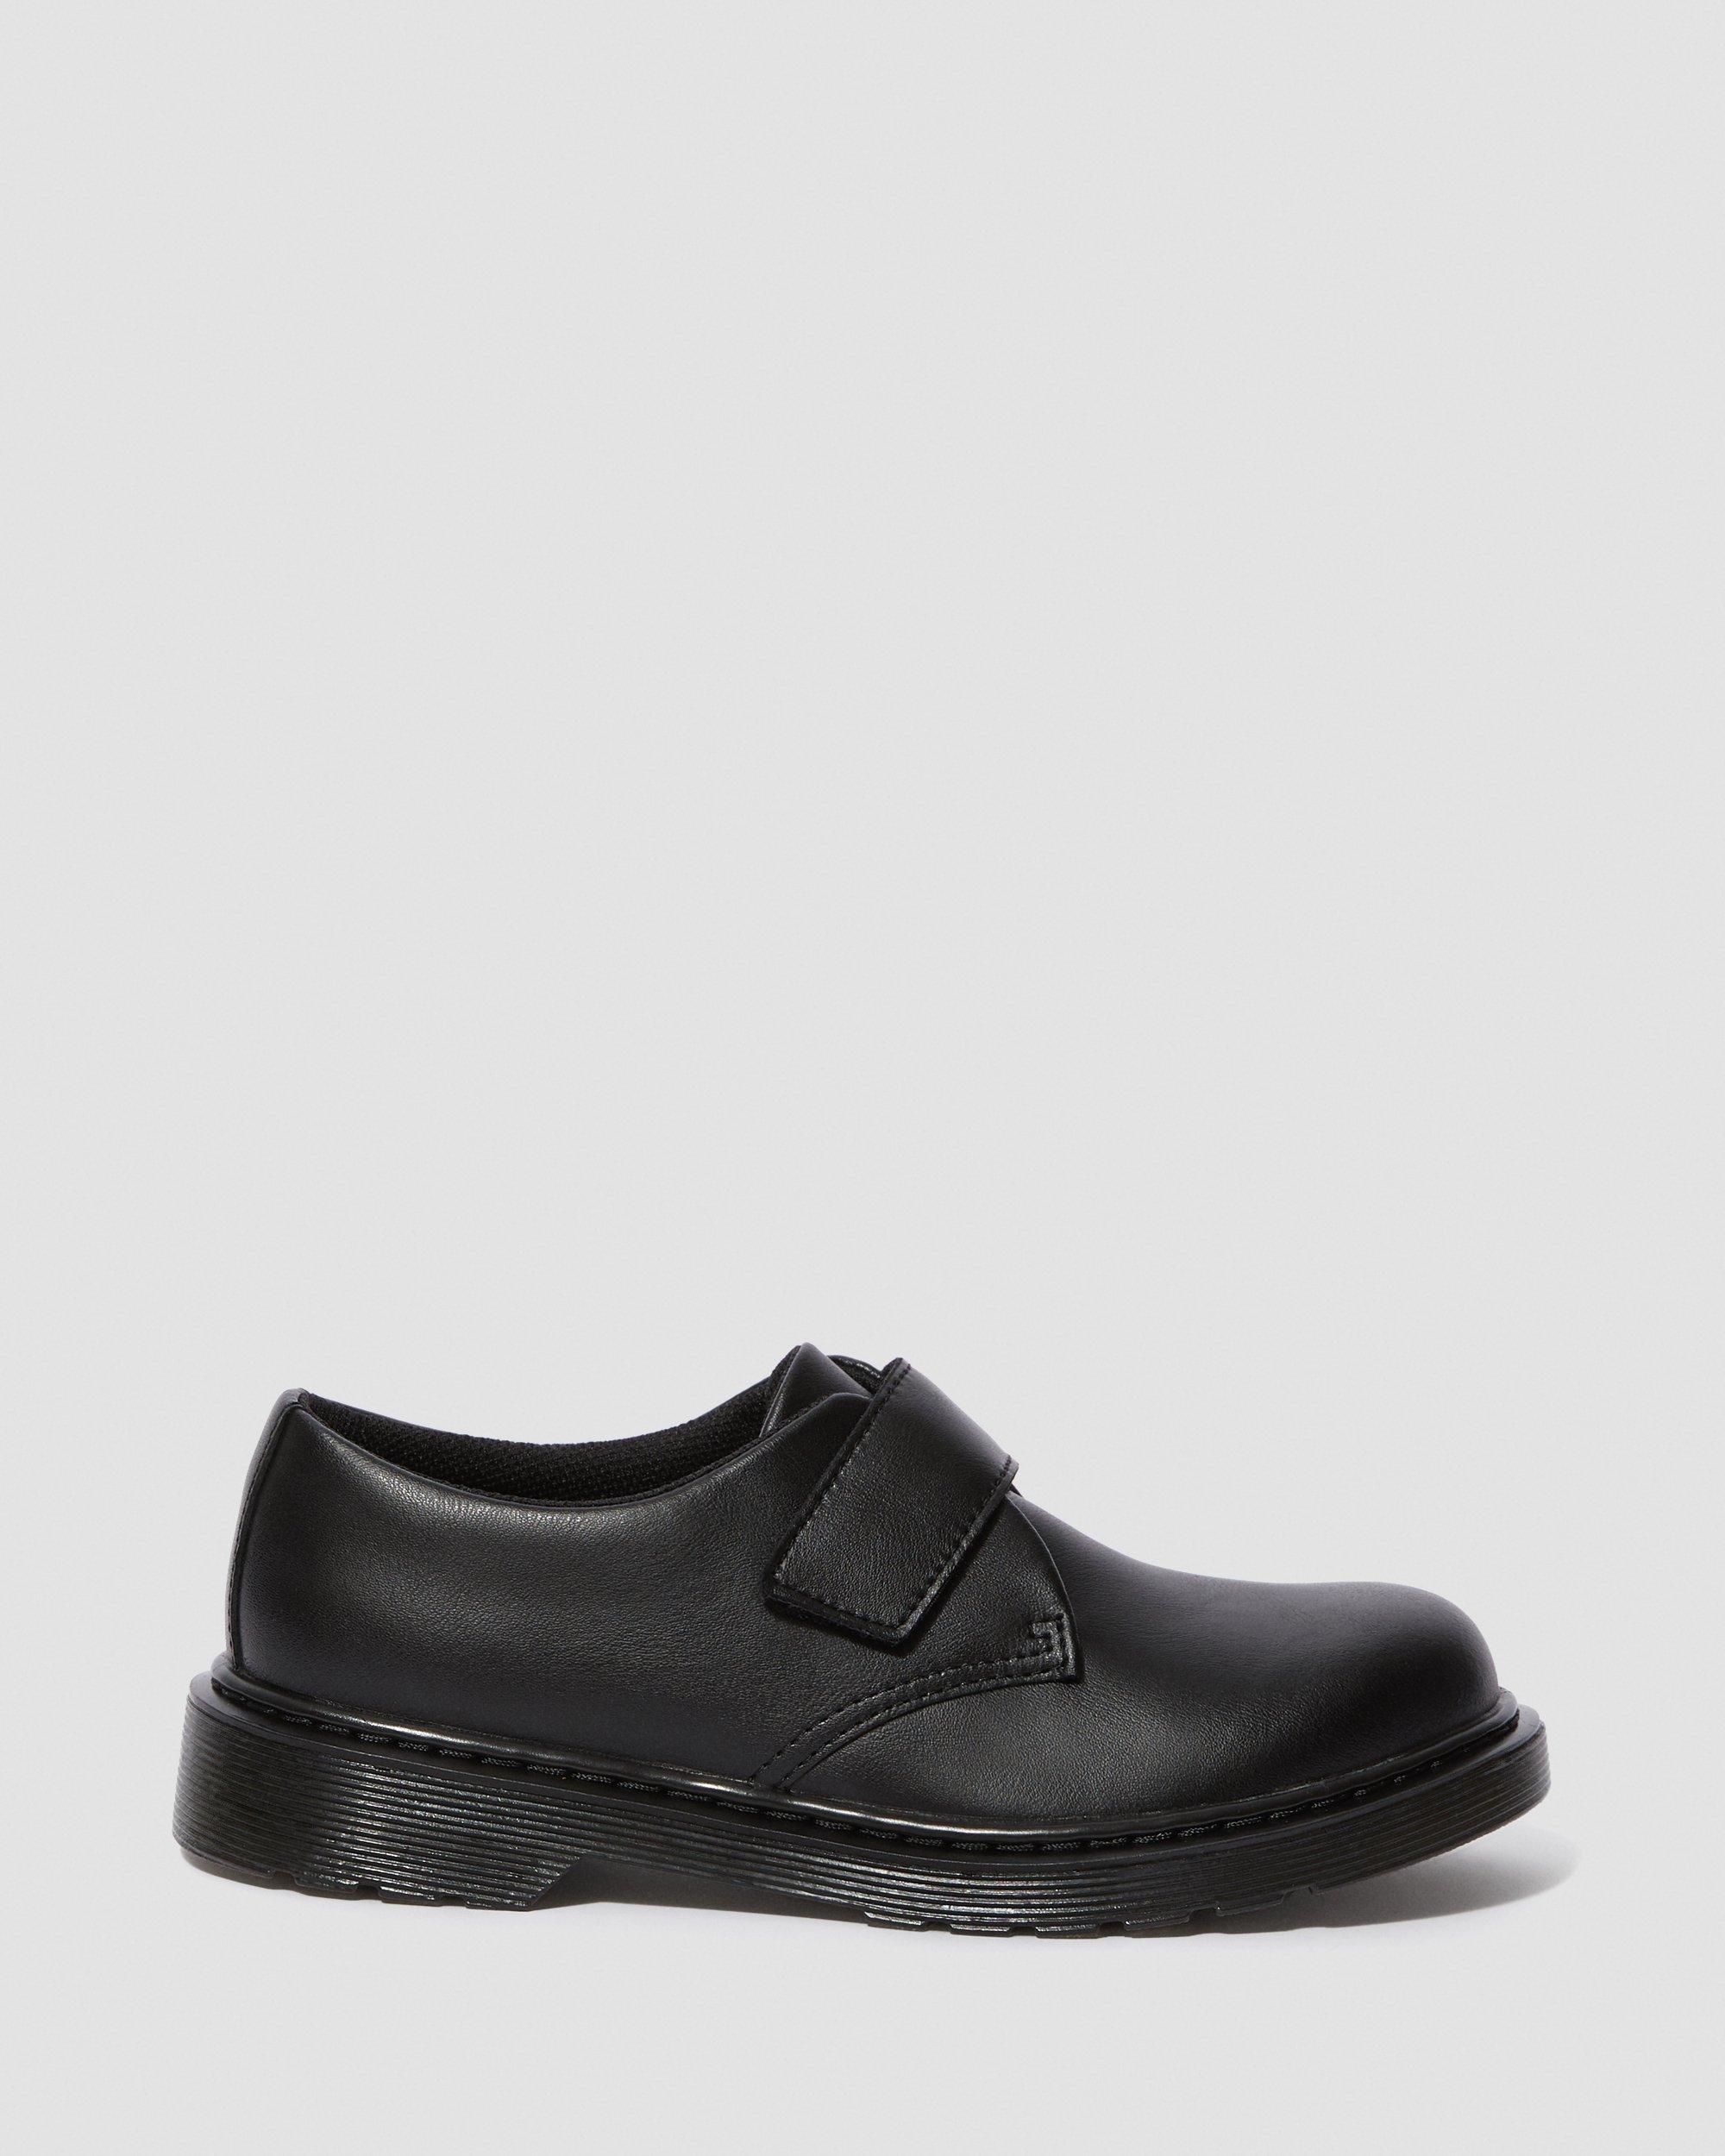 Youth Kamron Velcro Oxford ShoesYouth Kamron Velcro Oxford Shoes Dr. Martens